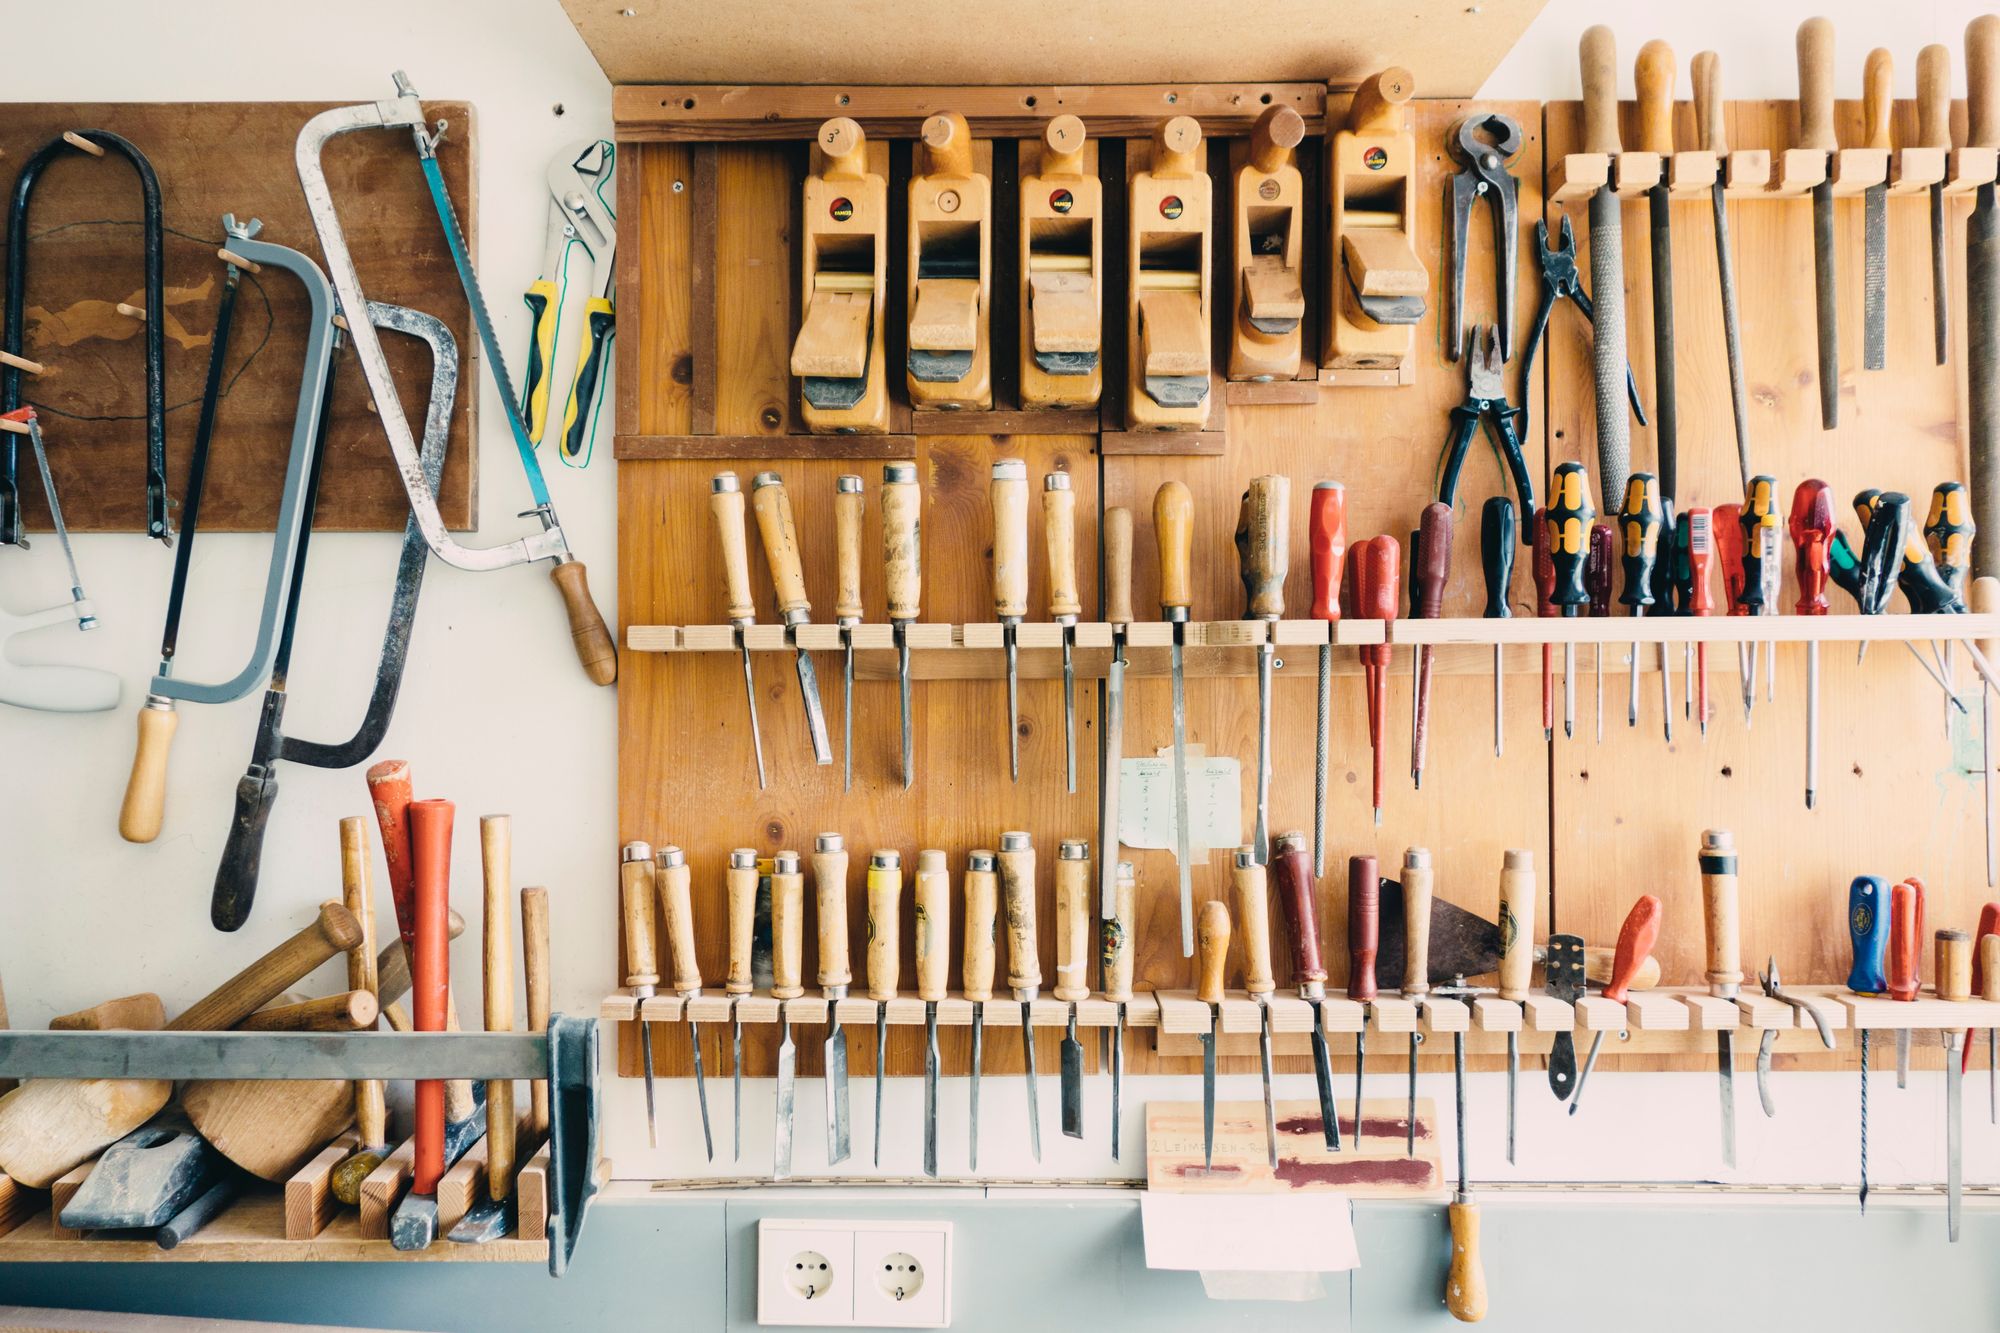 A well-tooled workshop is a furniture flipper's dream.